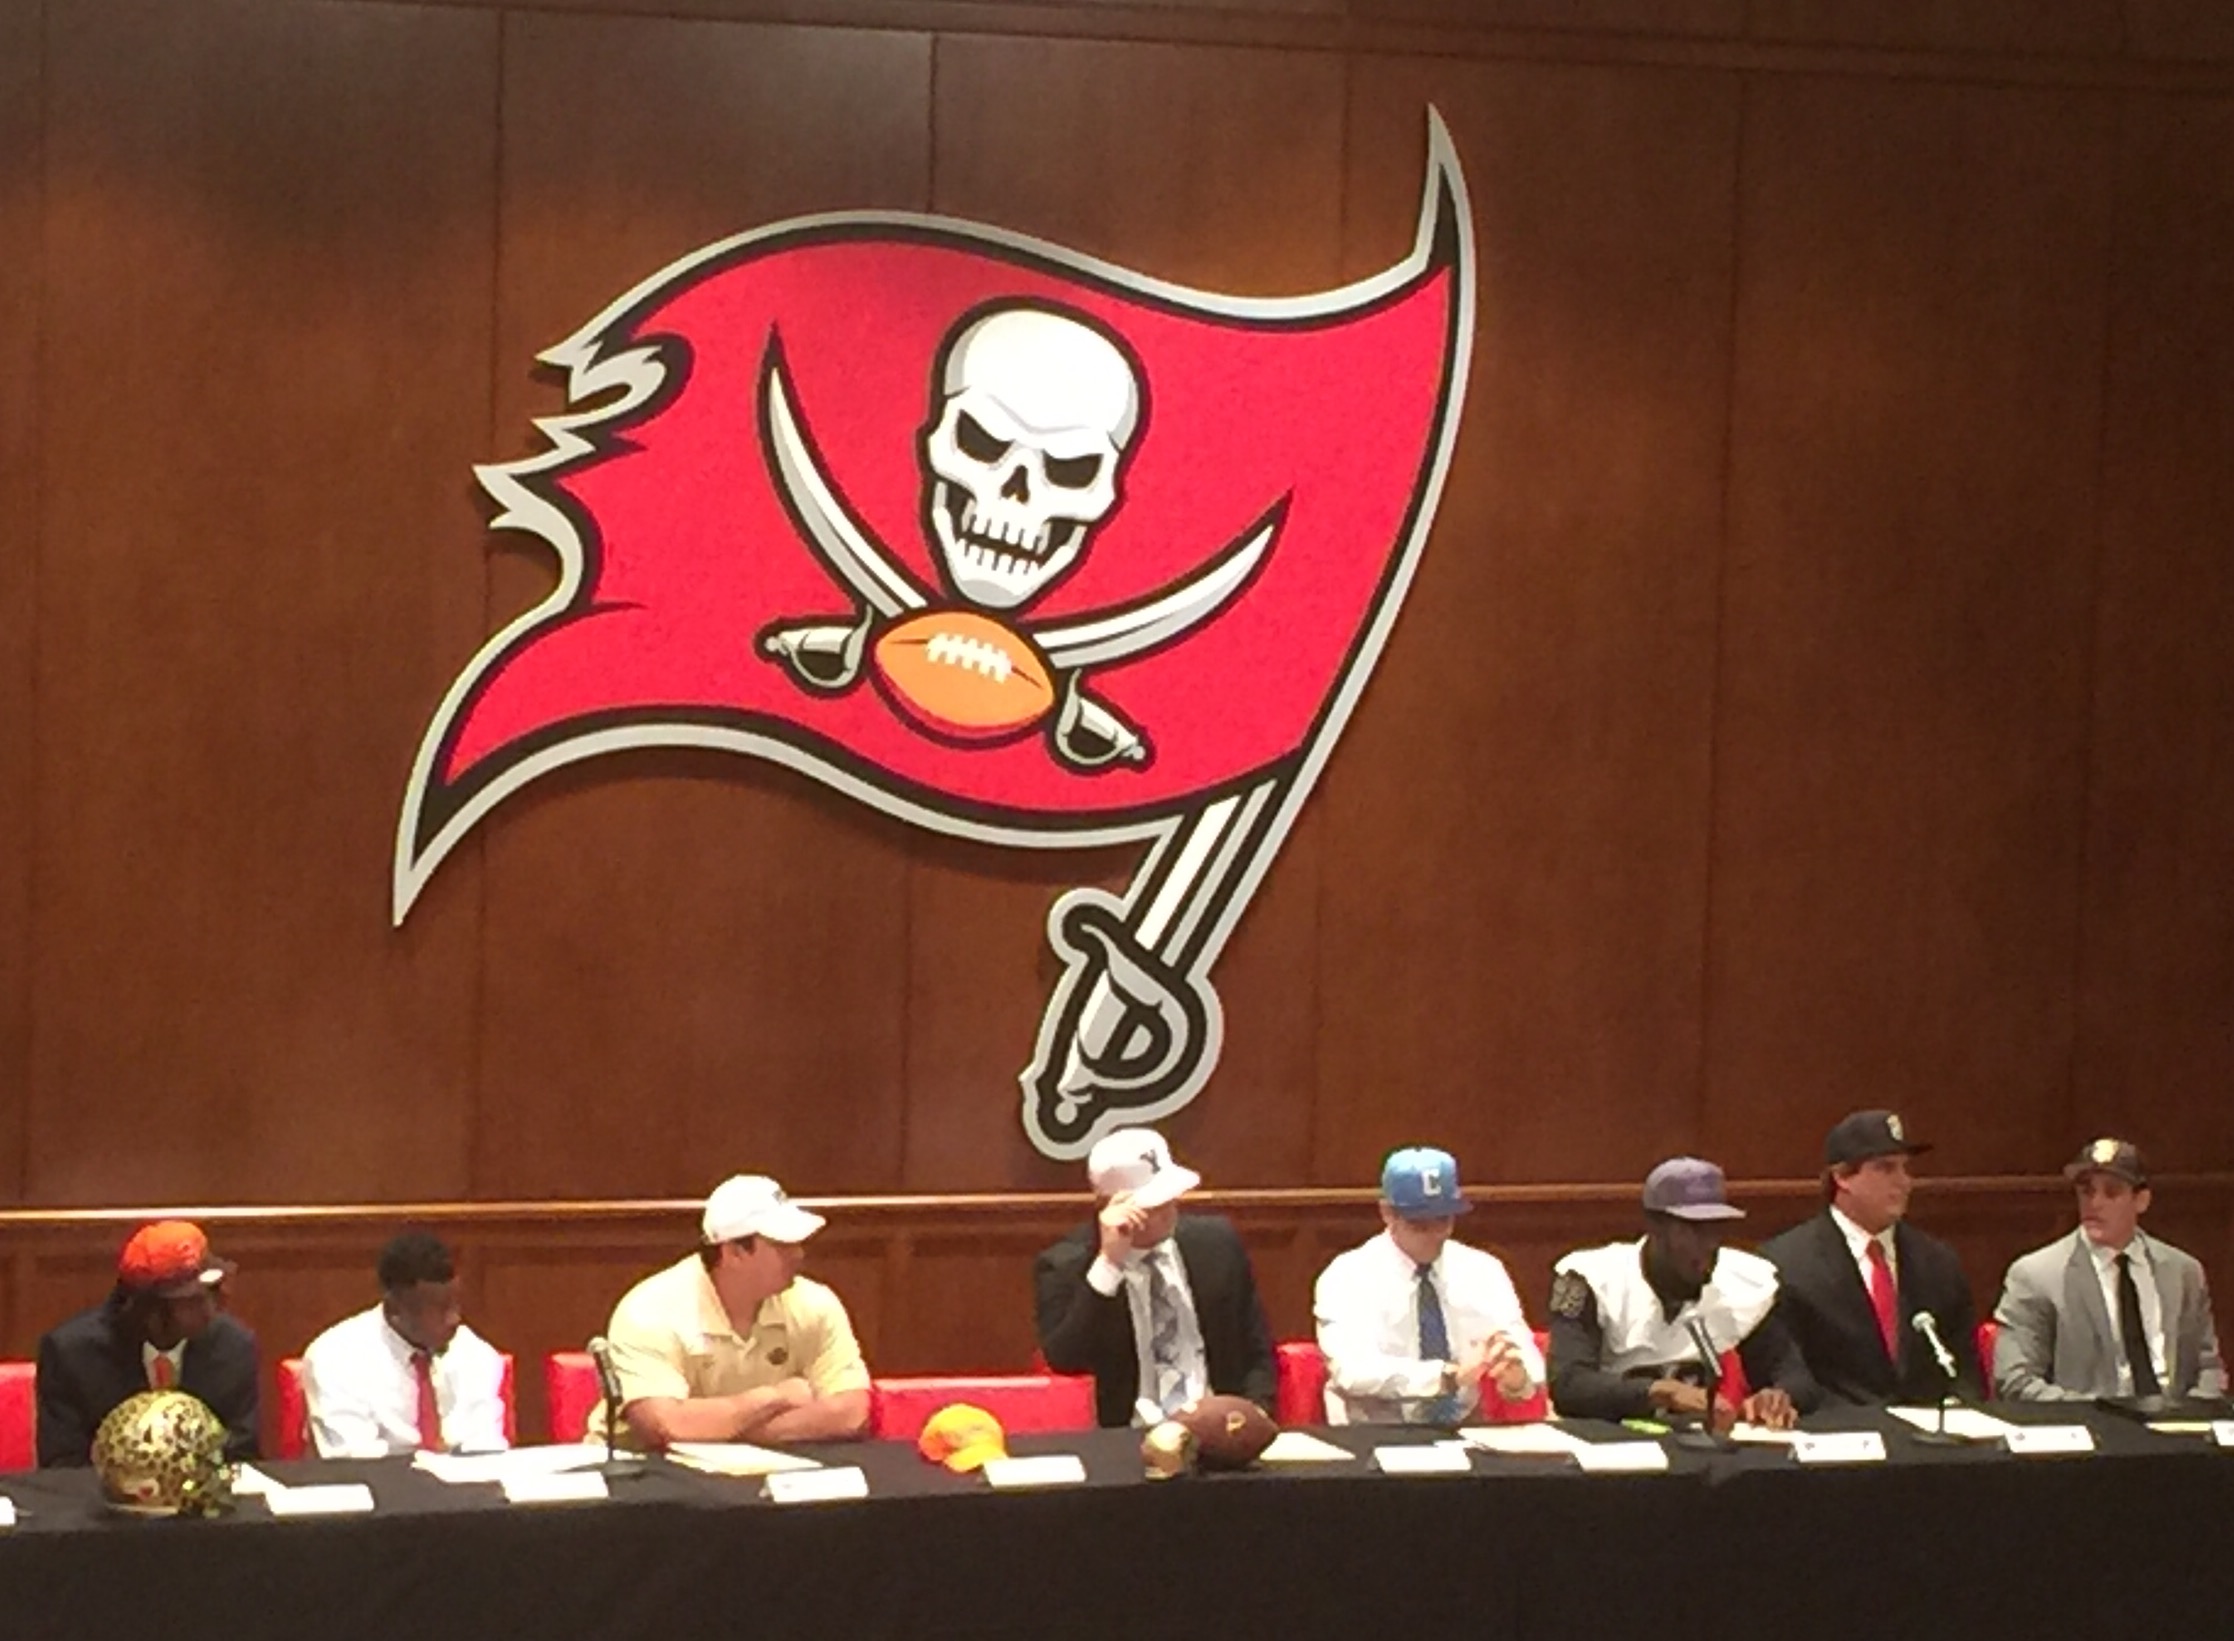 National Signing Day at One Buc 2016 (1).jpeg